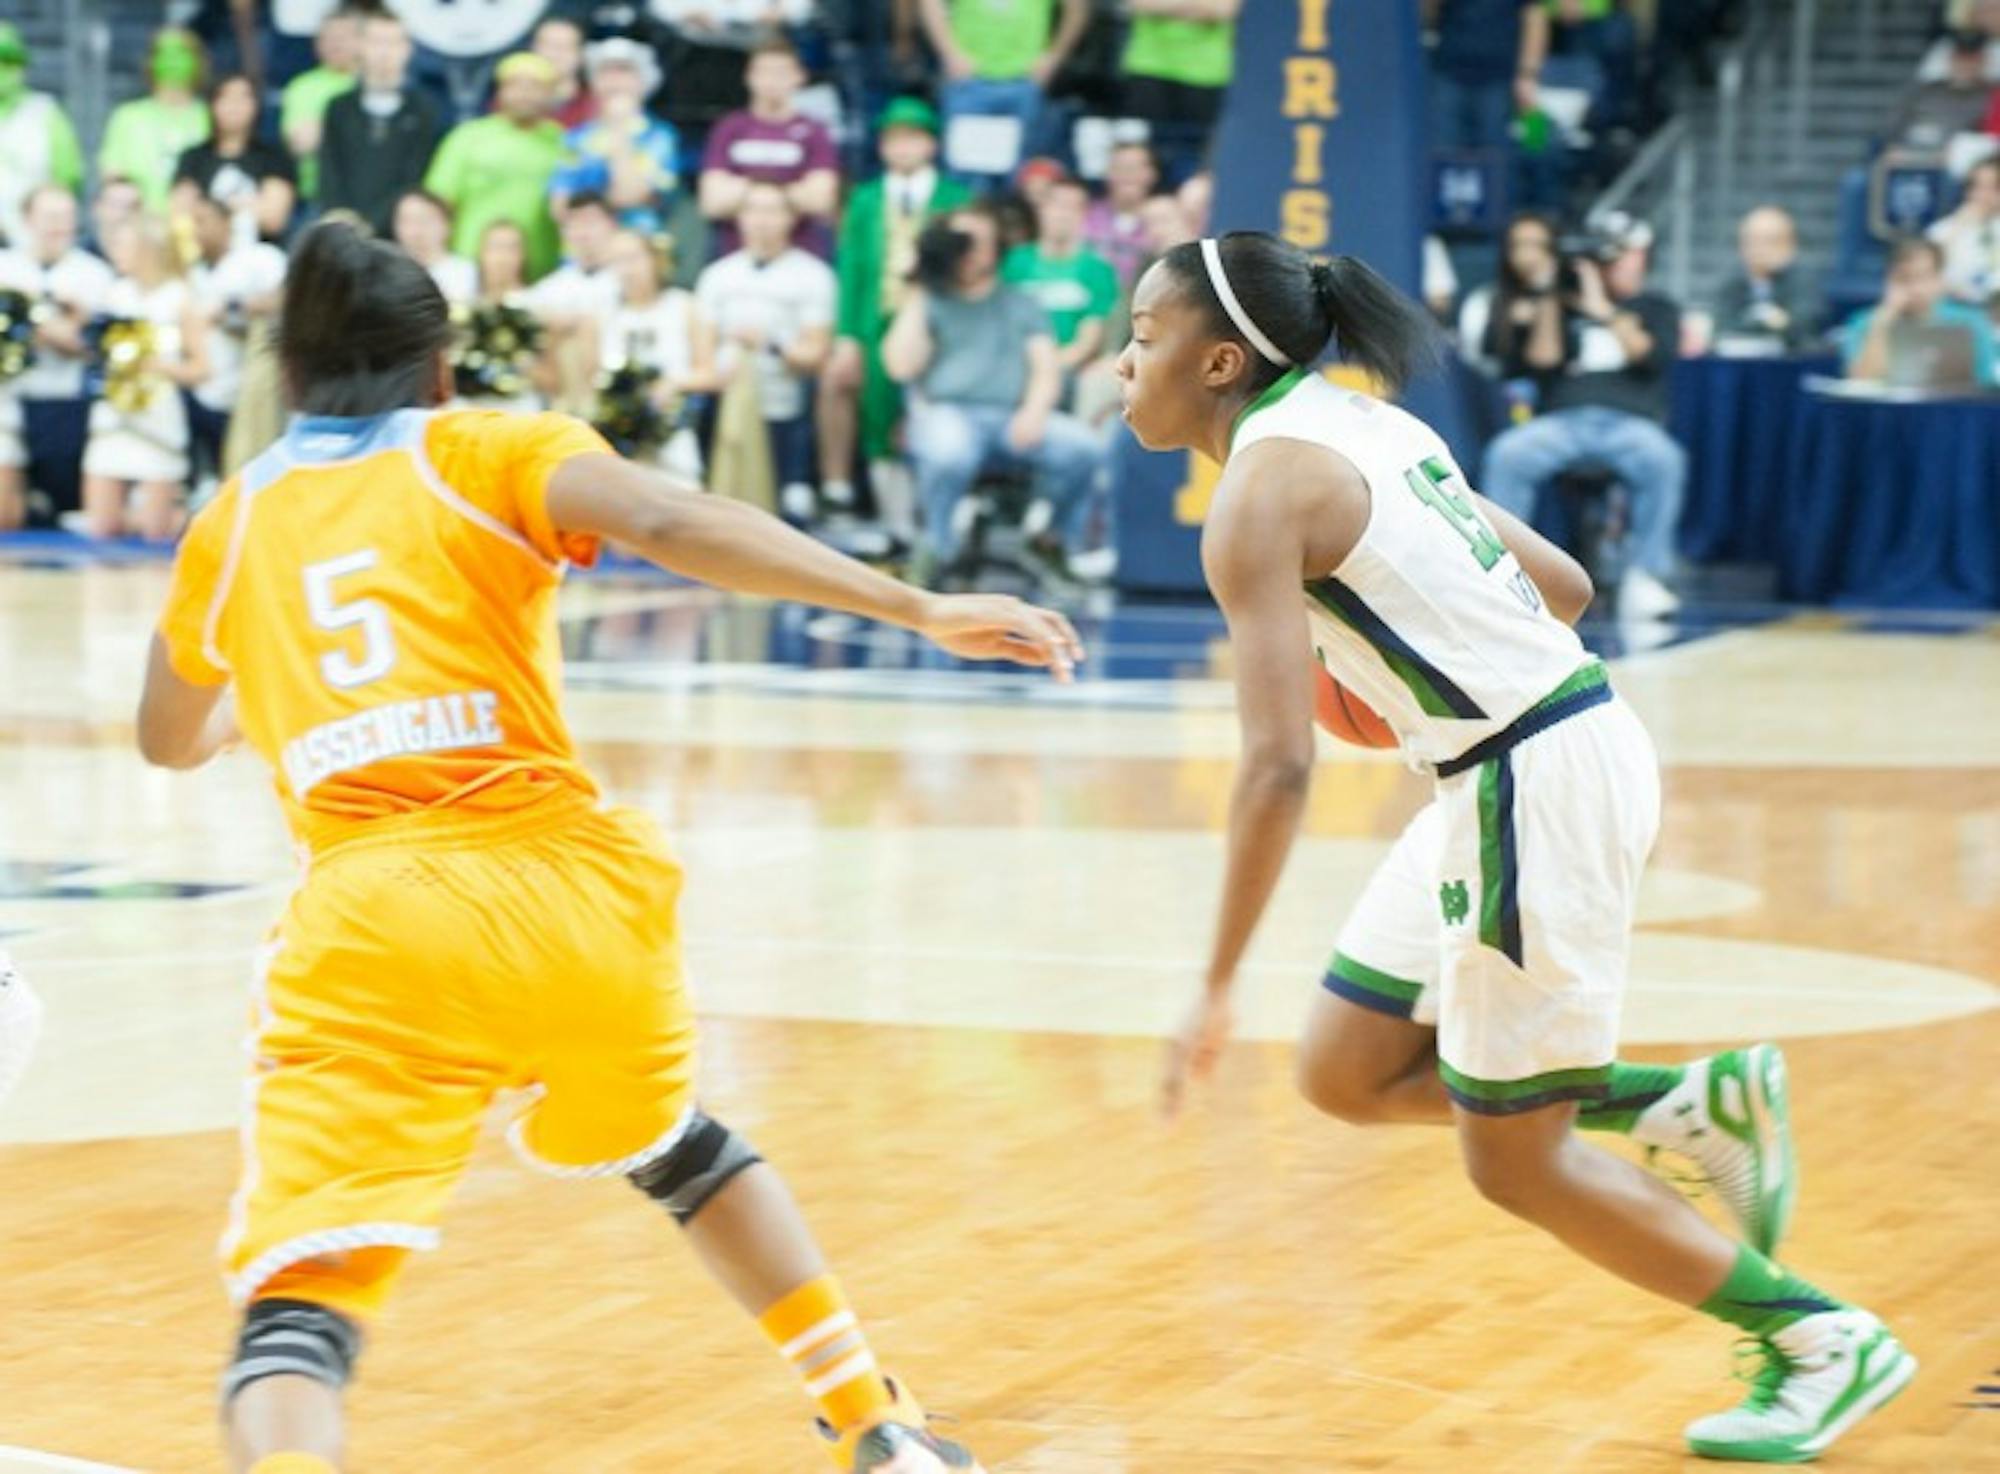 Irish sophomore guard Lindsay Allen works past a defender in Notre Dame’s 88-77 win over Tennessee on Monday night at Purcell Pavilion.